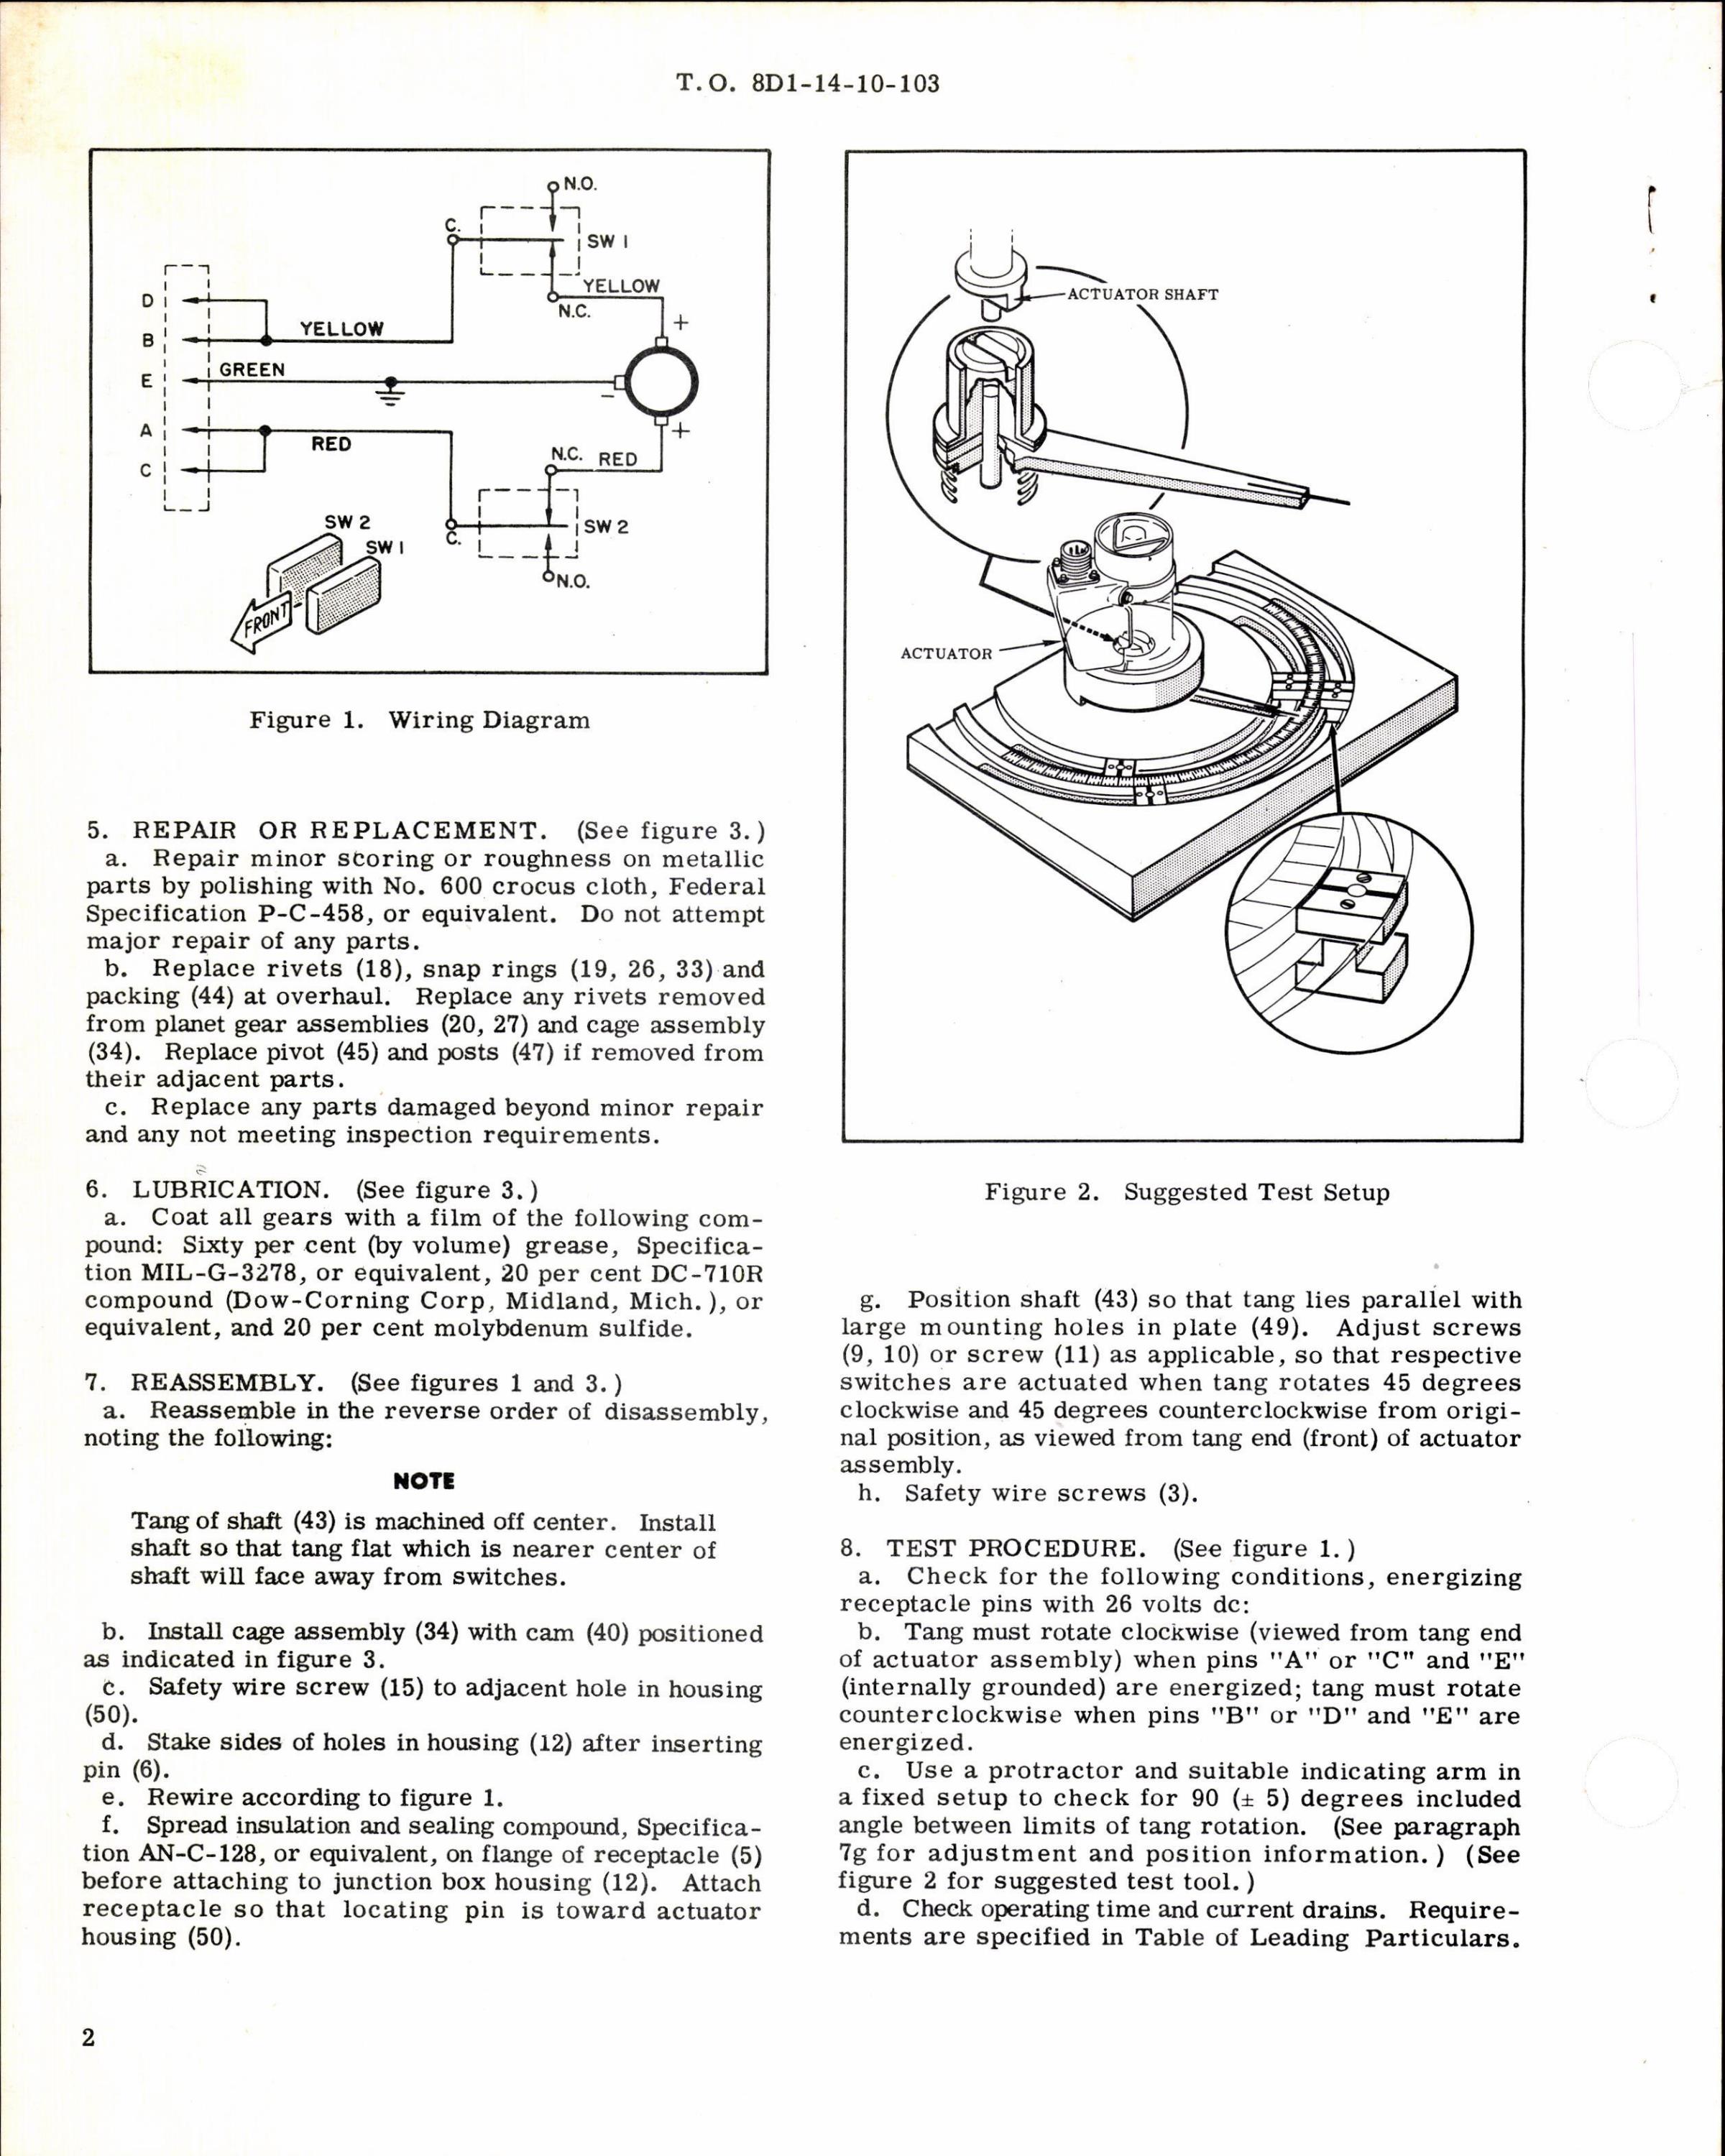 Sample page 2 from AirCorps Library document: Instructions w Parts Breakdown for Actuator Assembly Part 108372